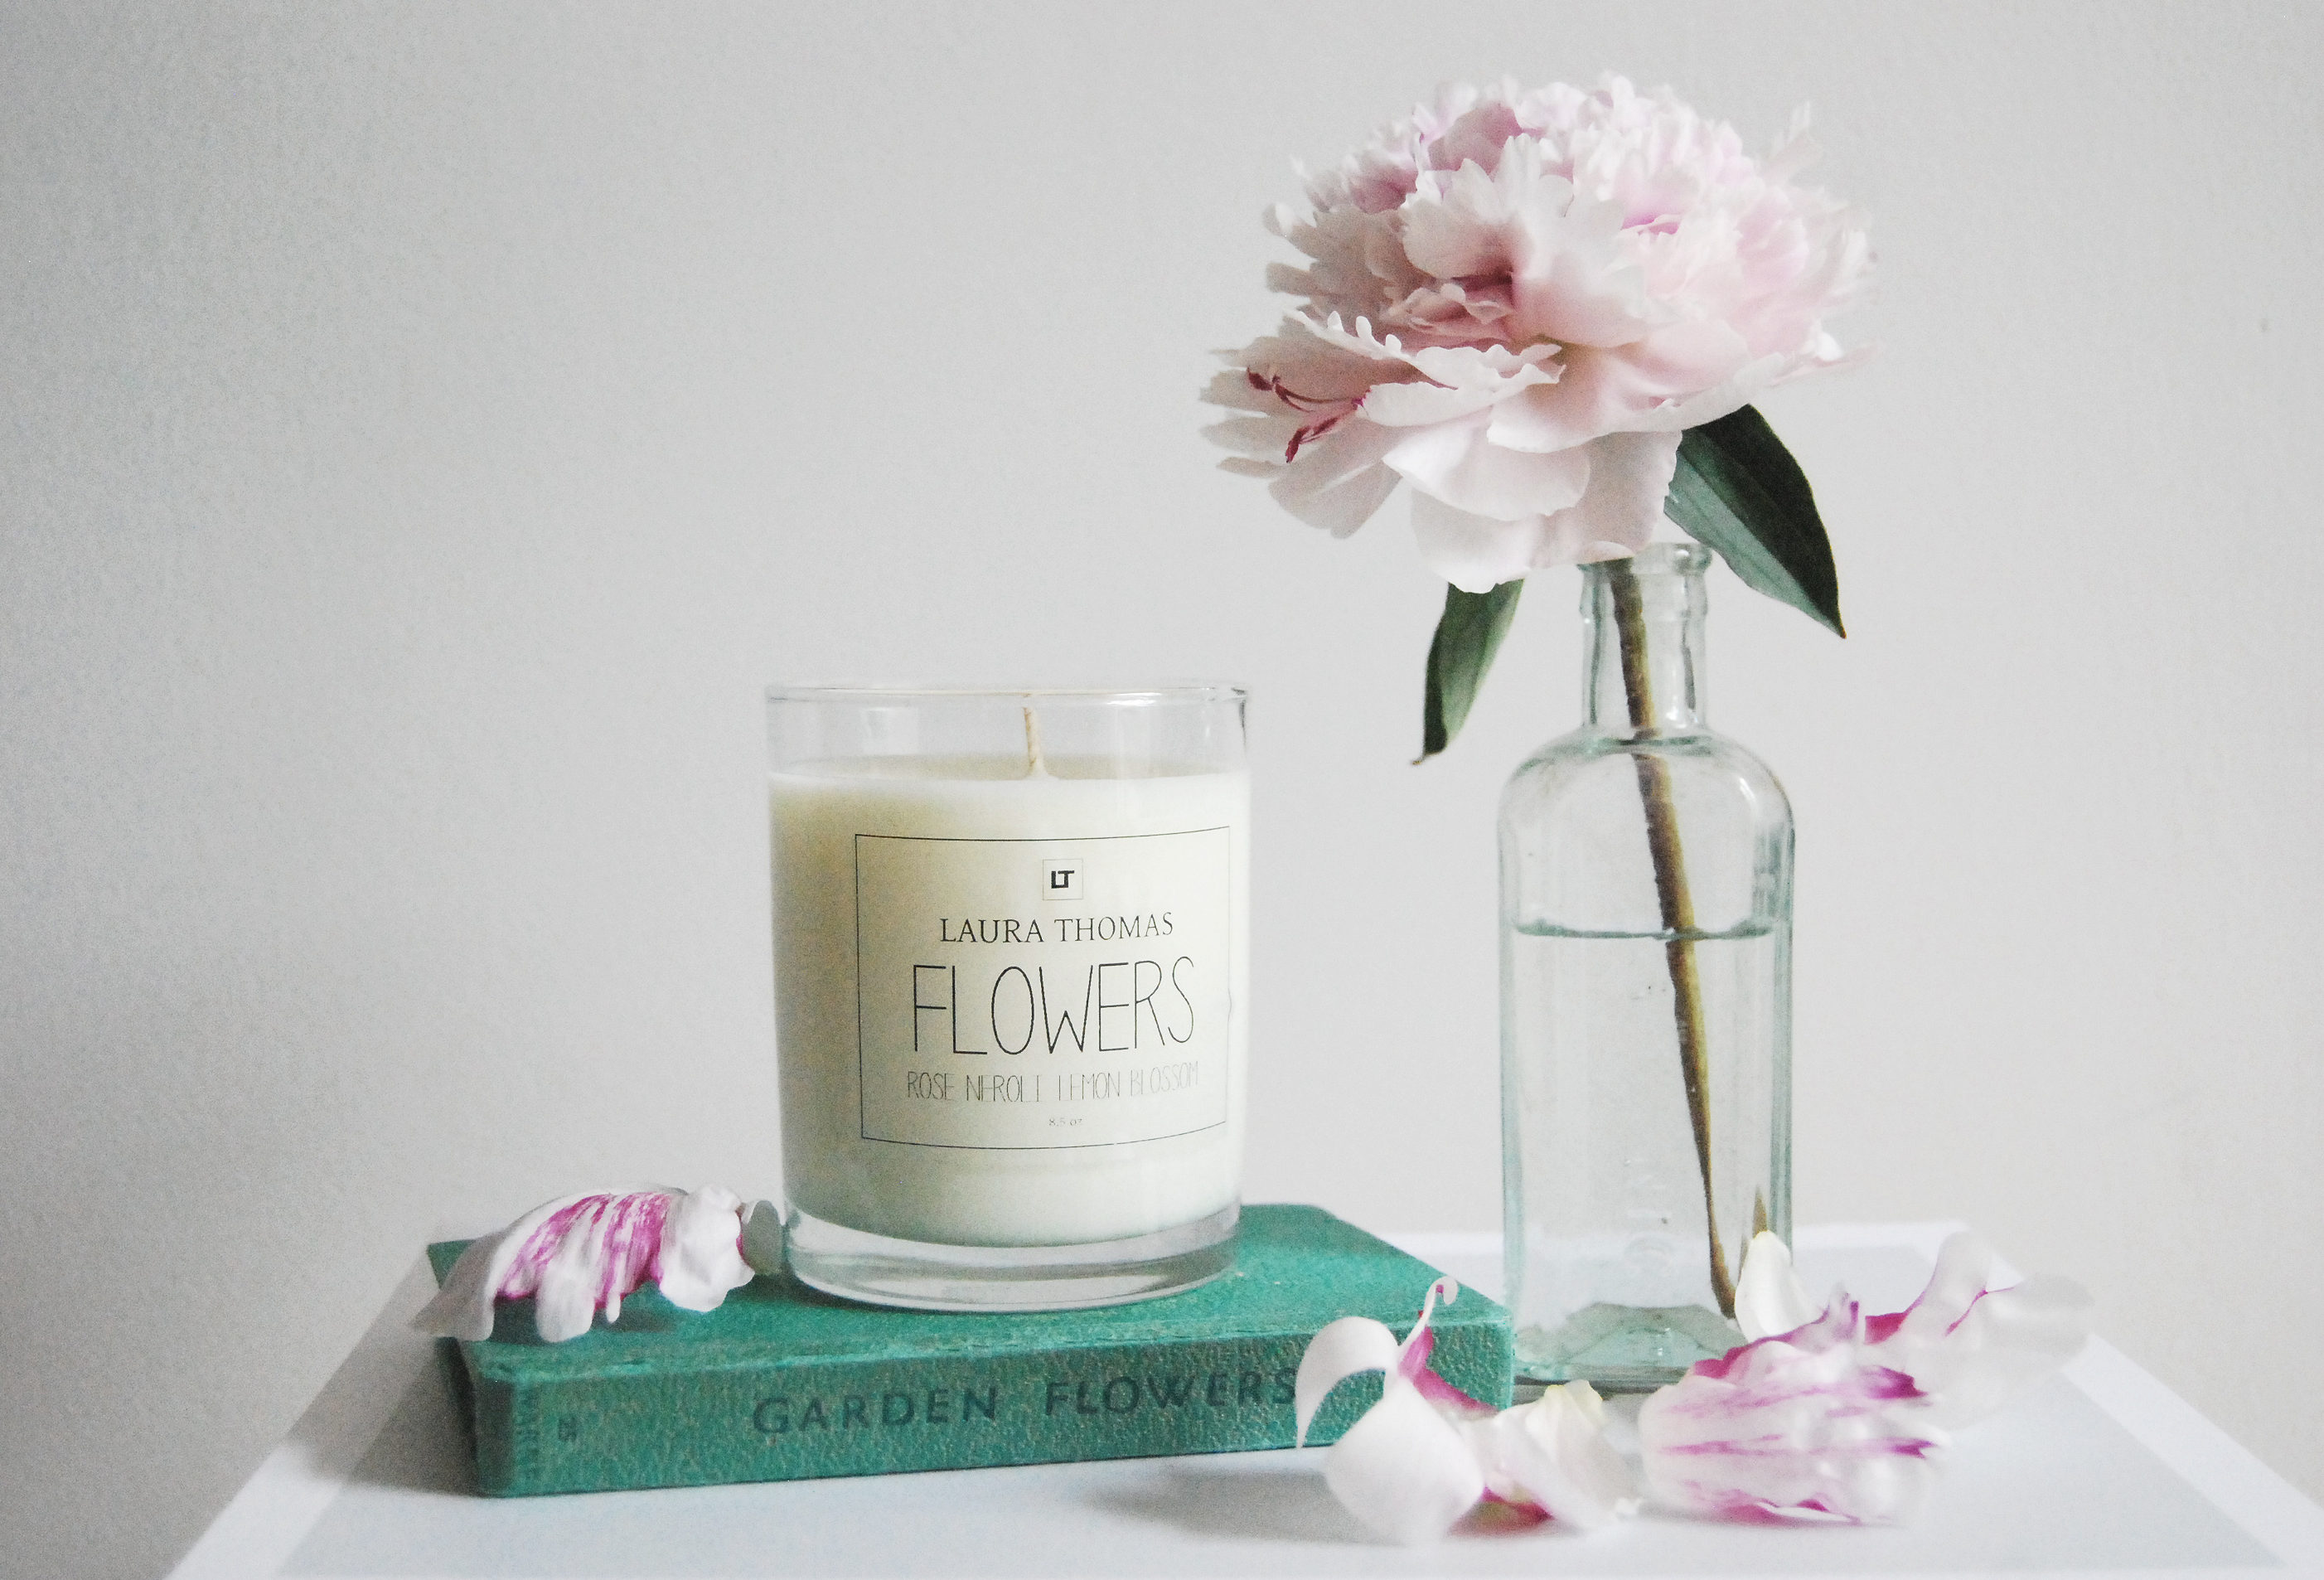 laura-thomas-flowers-candle-100